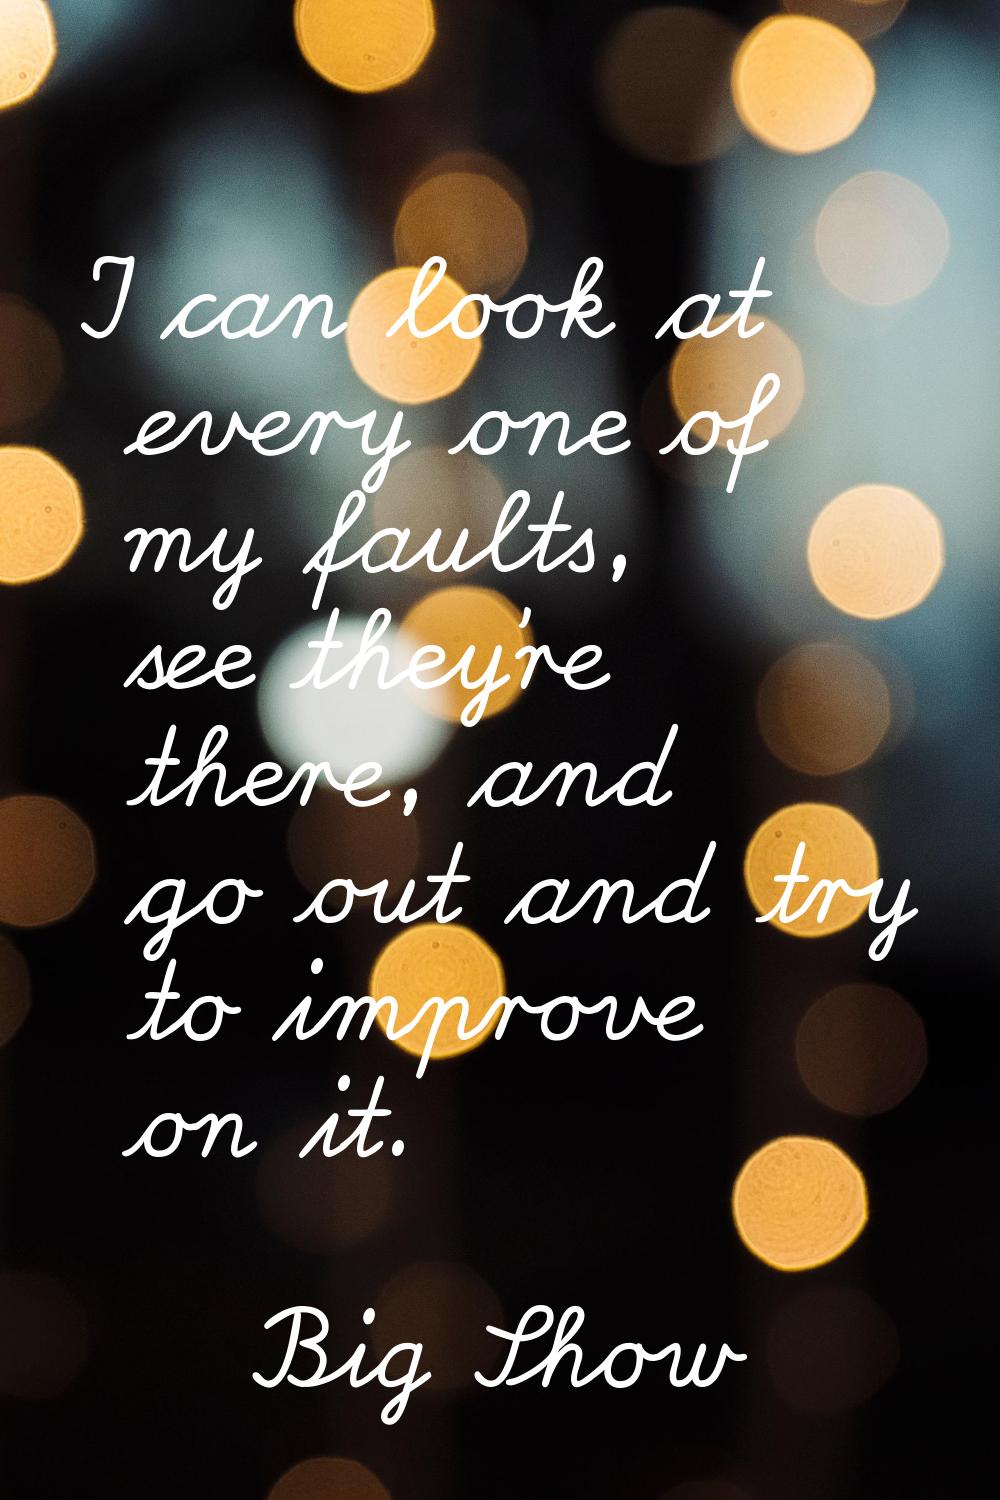 I can look at every one of my faults, see they're there, and go out and try to improve on it.